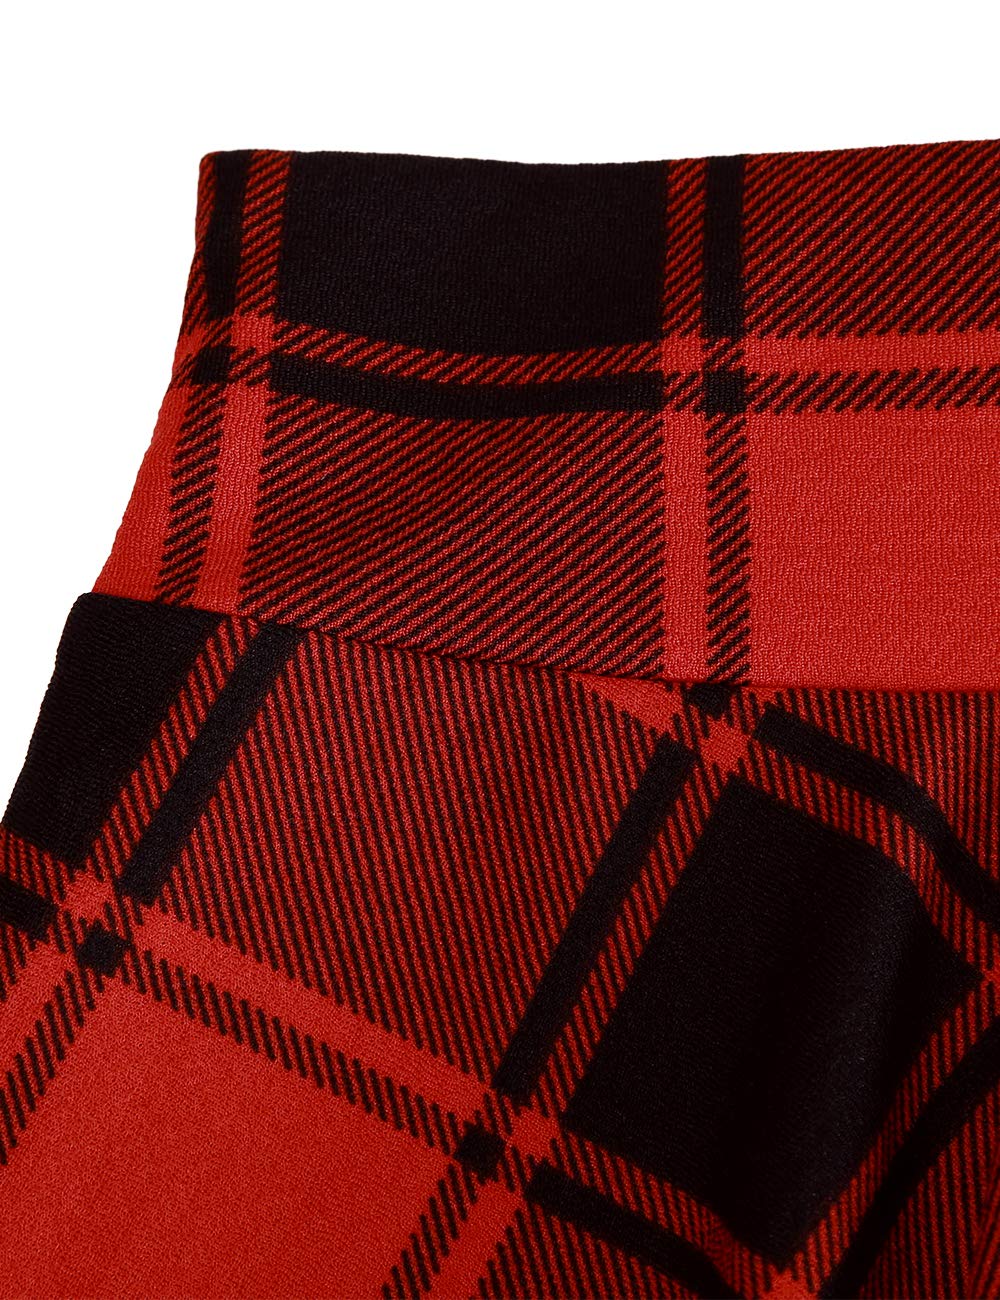 DJT Flared Pleated Red Plaid Women's Casual Stretchy Mini Skater Skirt with Shorts